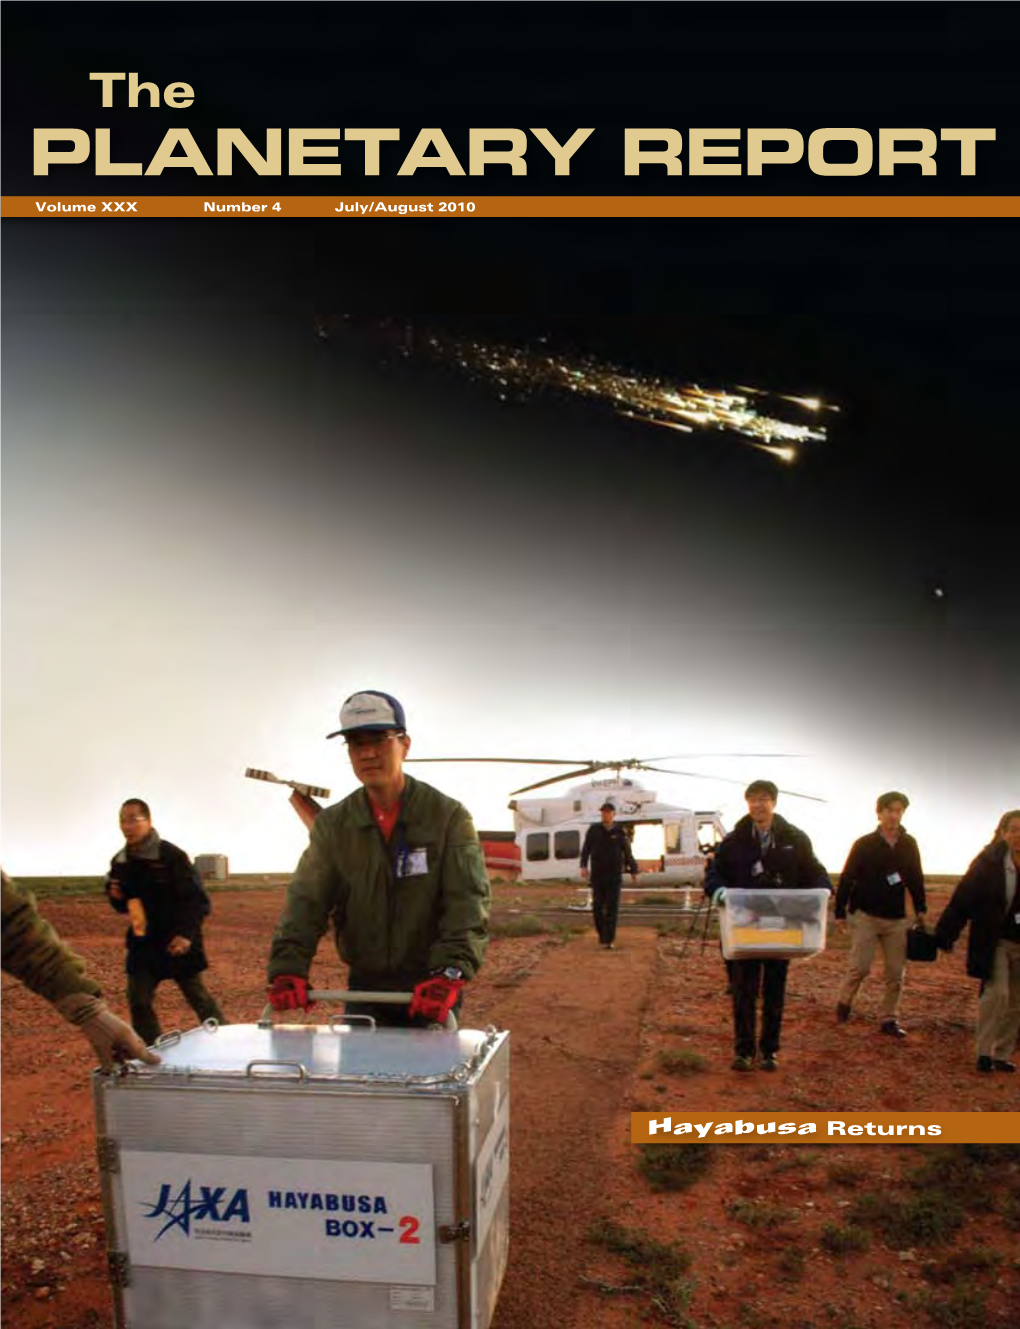 PLANETARY REPORT Volume XXX Number 4 July/August 2010